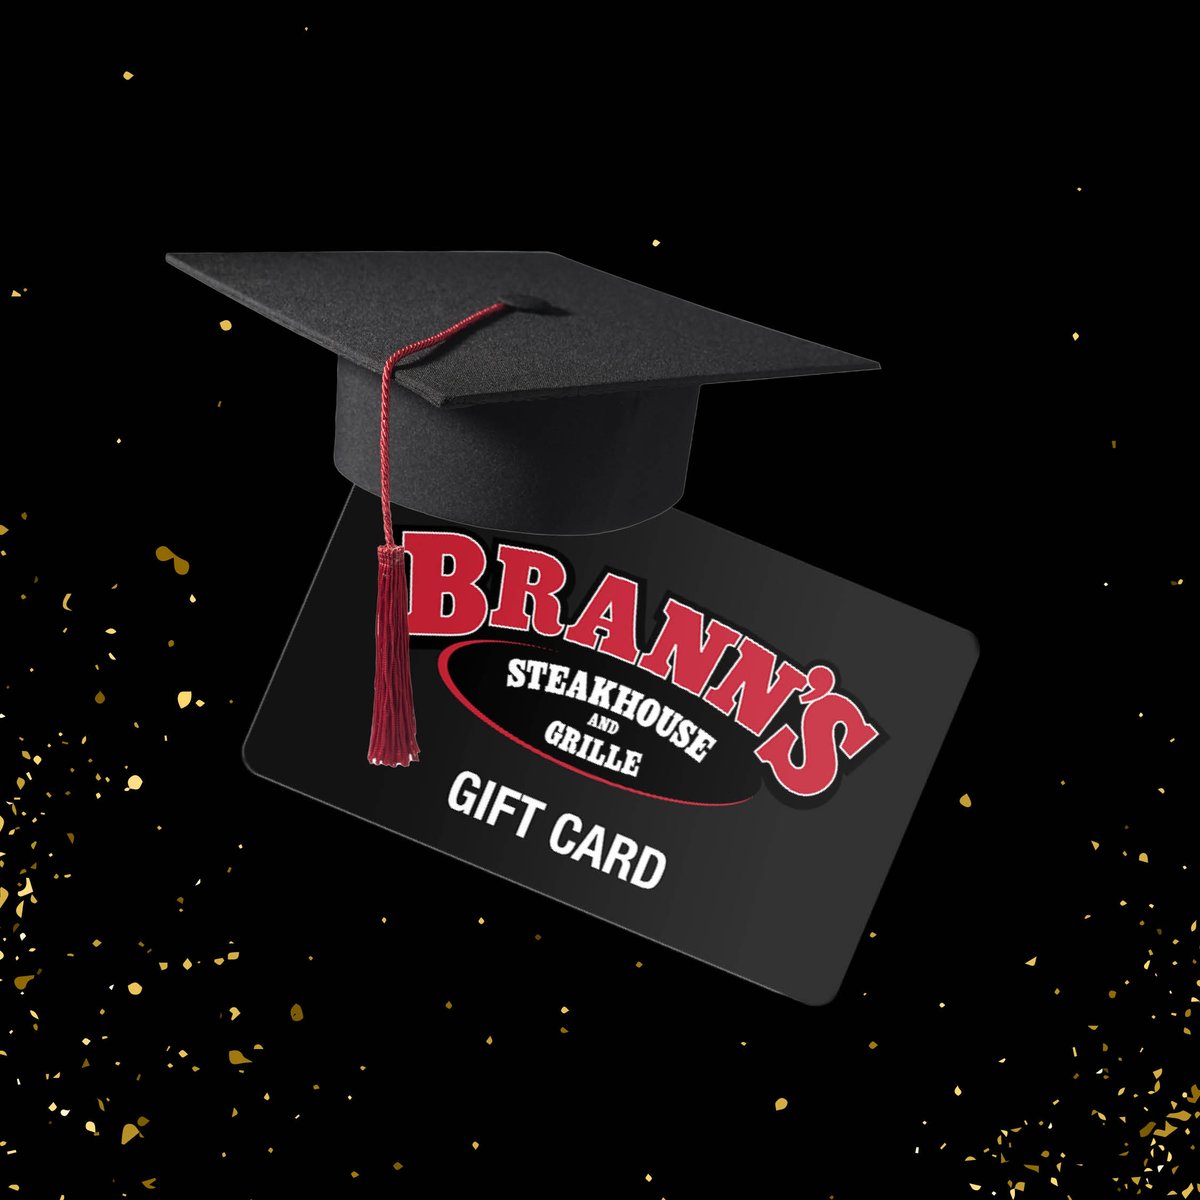 Reward the graduate in your life with a tasty gift from Brann's to celebrate their milestone. Order a gift card today: bit.ly/2ZKflxE. #EatAtBranns #GiftCards #Foodie #Gift #MichigansOriginalSizzle